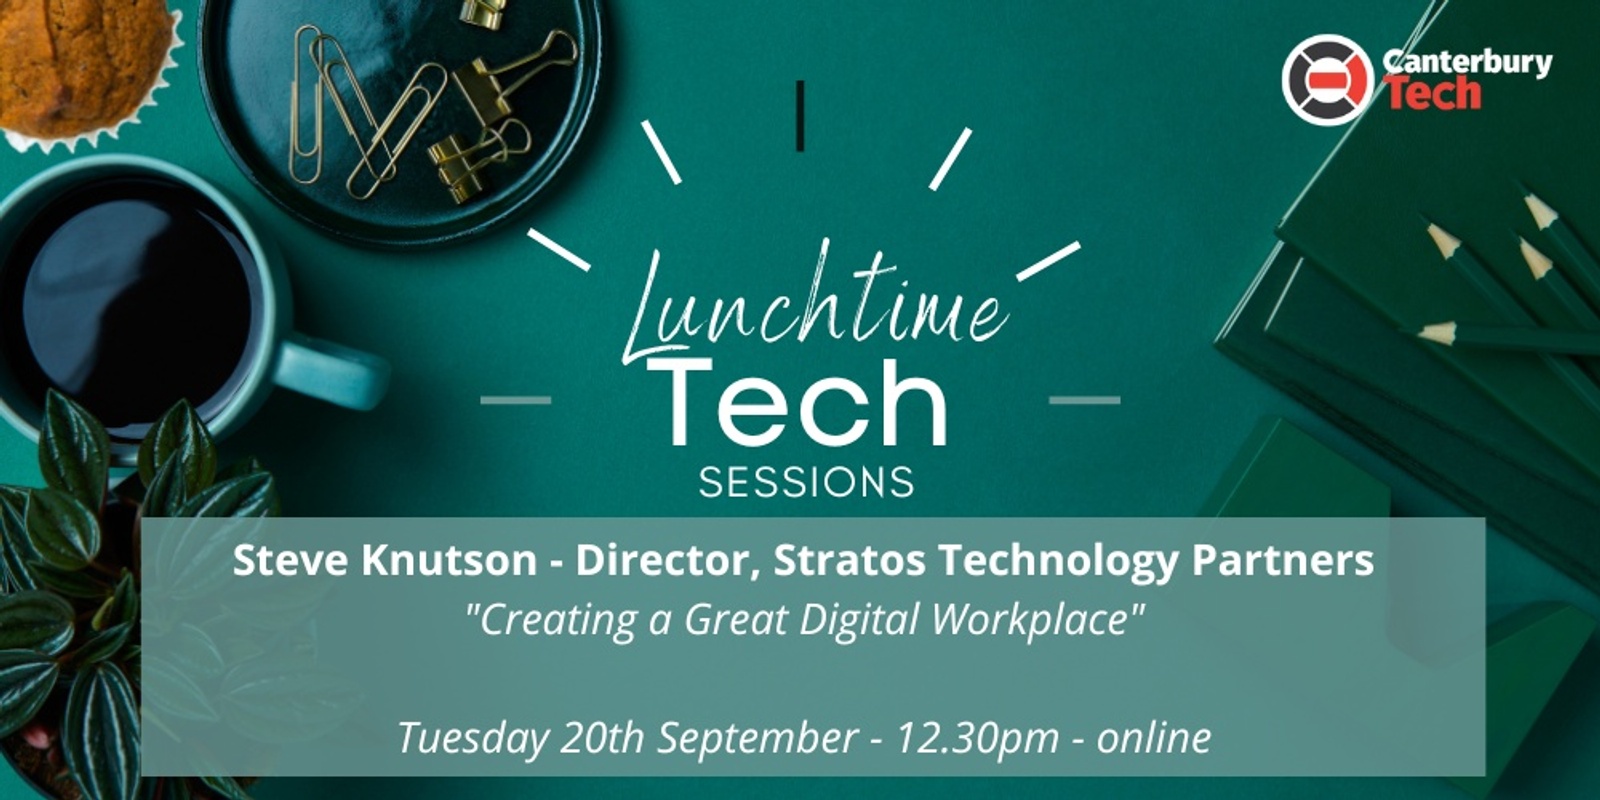 Banner image for Lunchtime Tech Sessions by Canterbury Tech - 20th September 2022